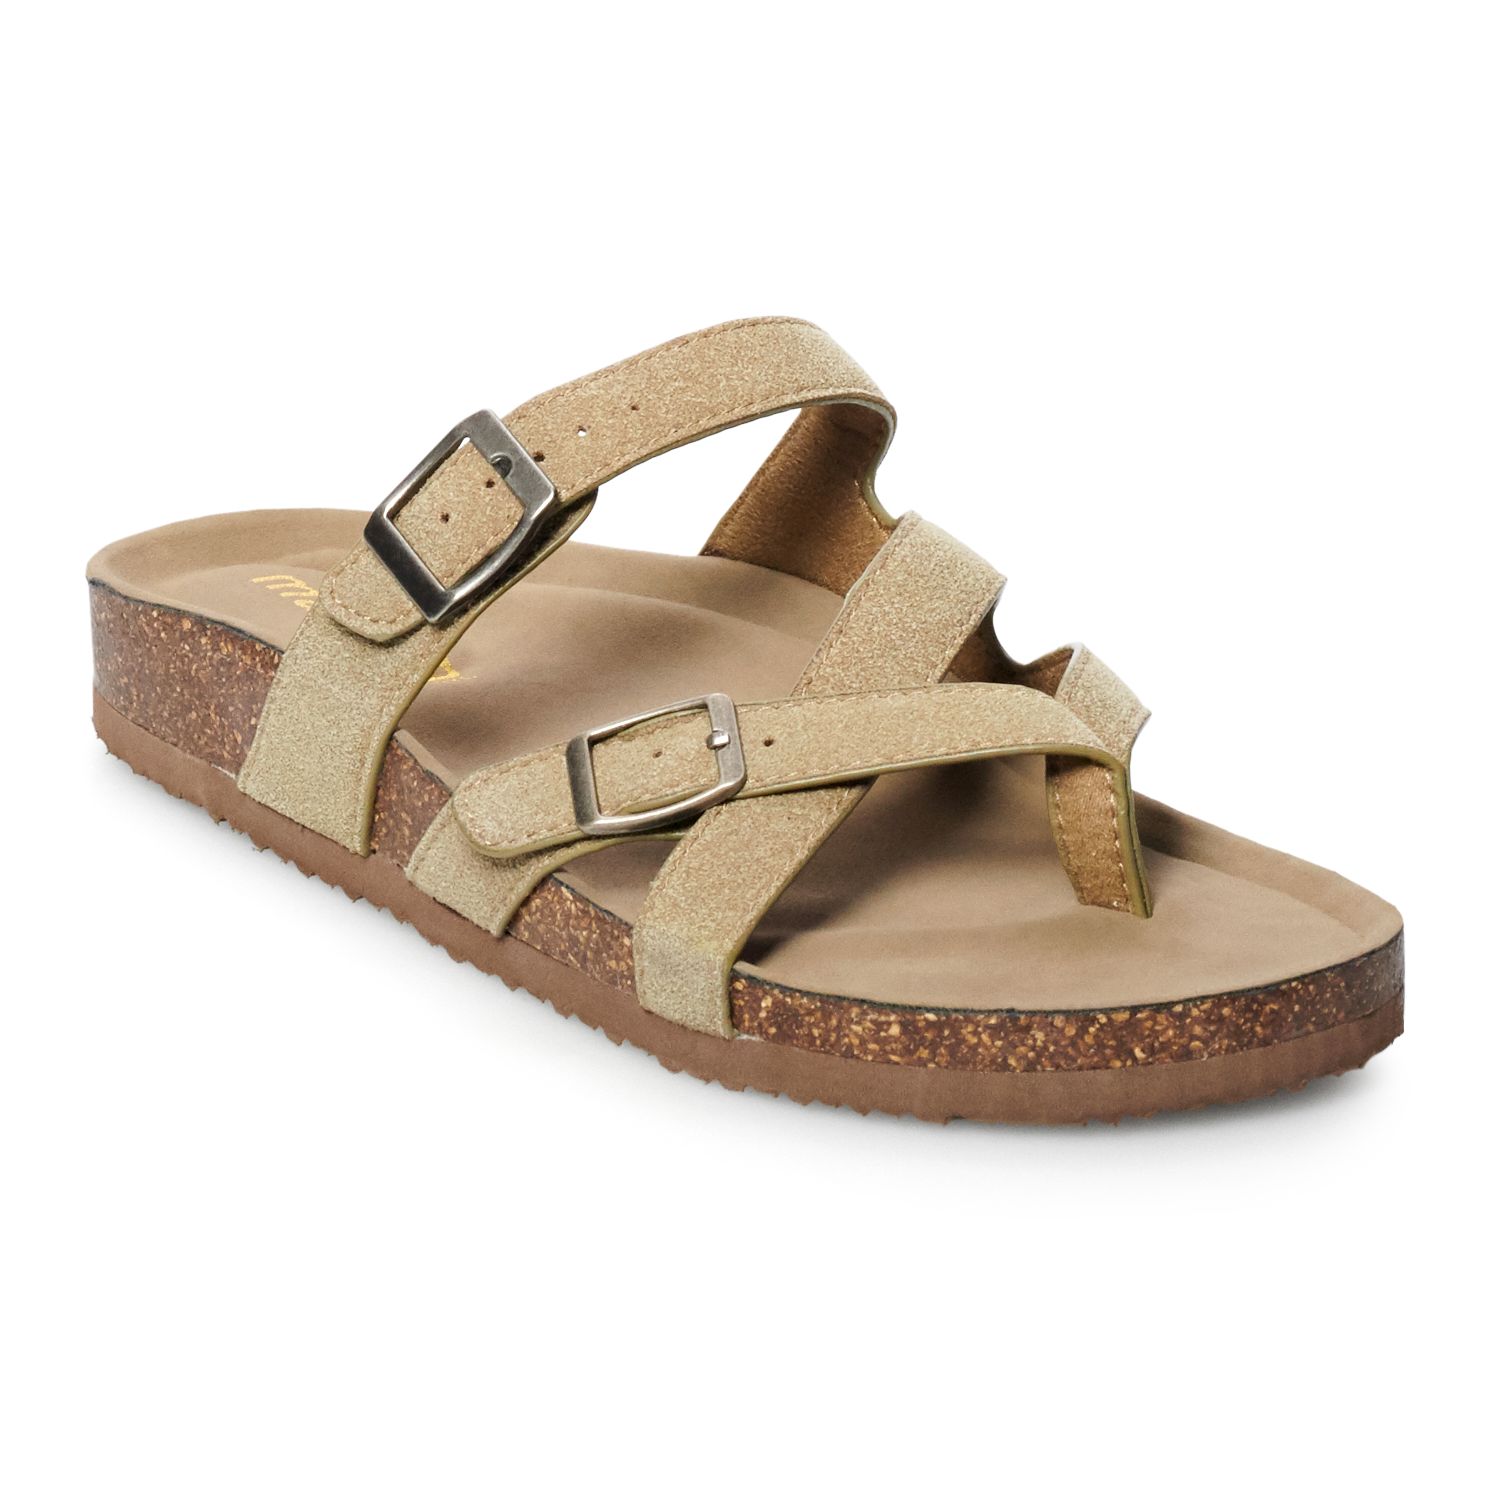 madden NYC Bunny Women's Footbed Sandals